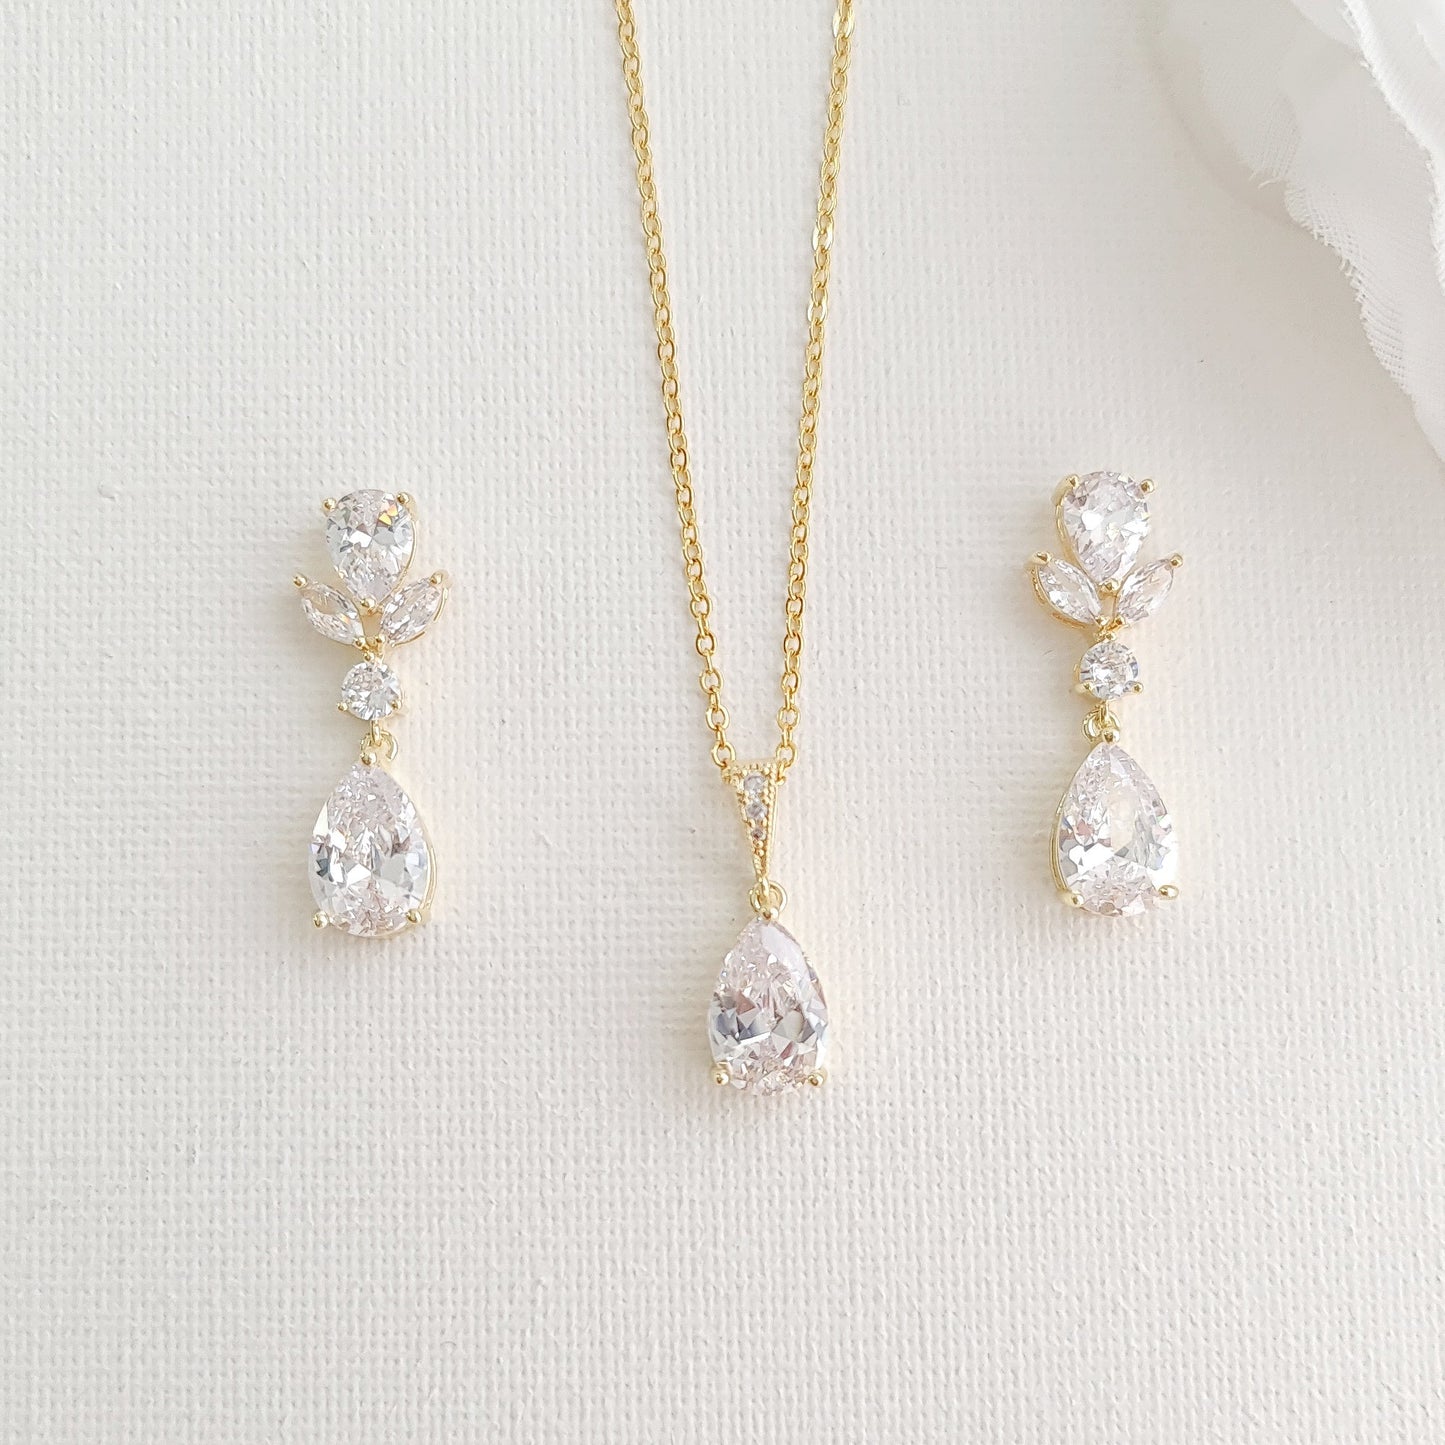 Yellow Gold Earrings Necklace and Bracelet Set for Wedding-Nicole